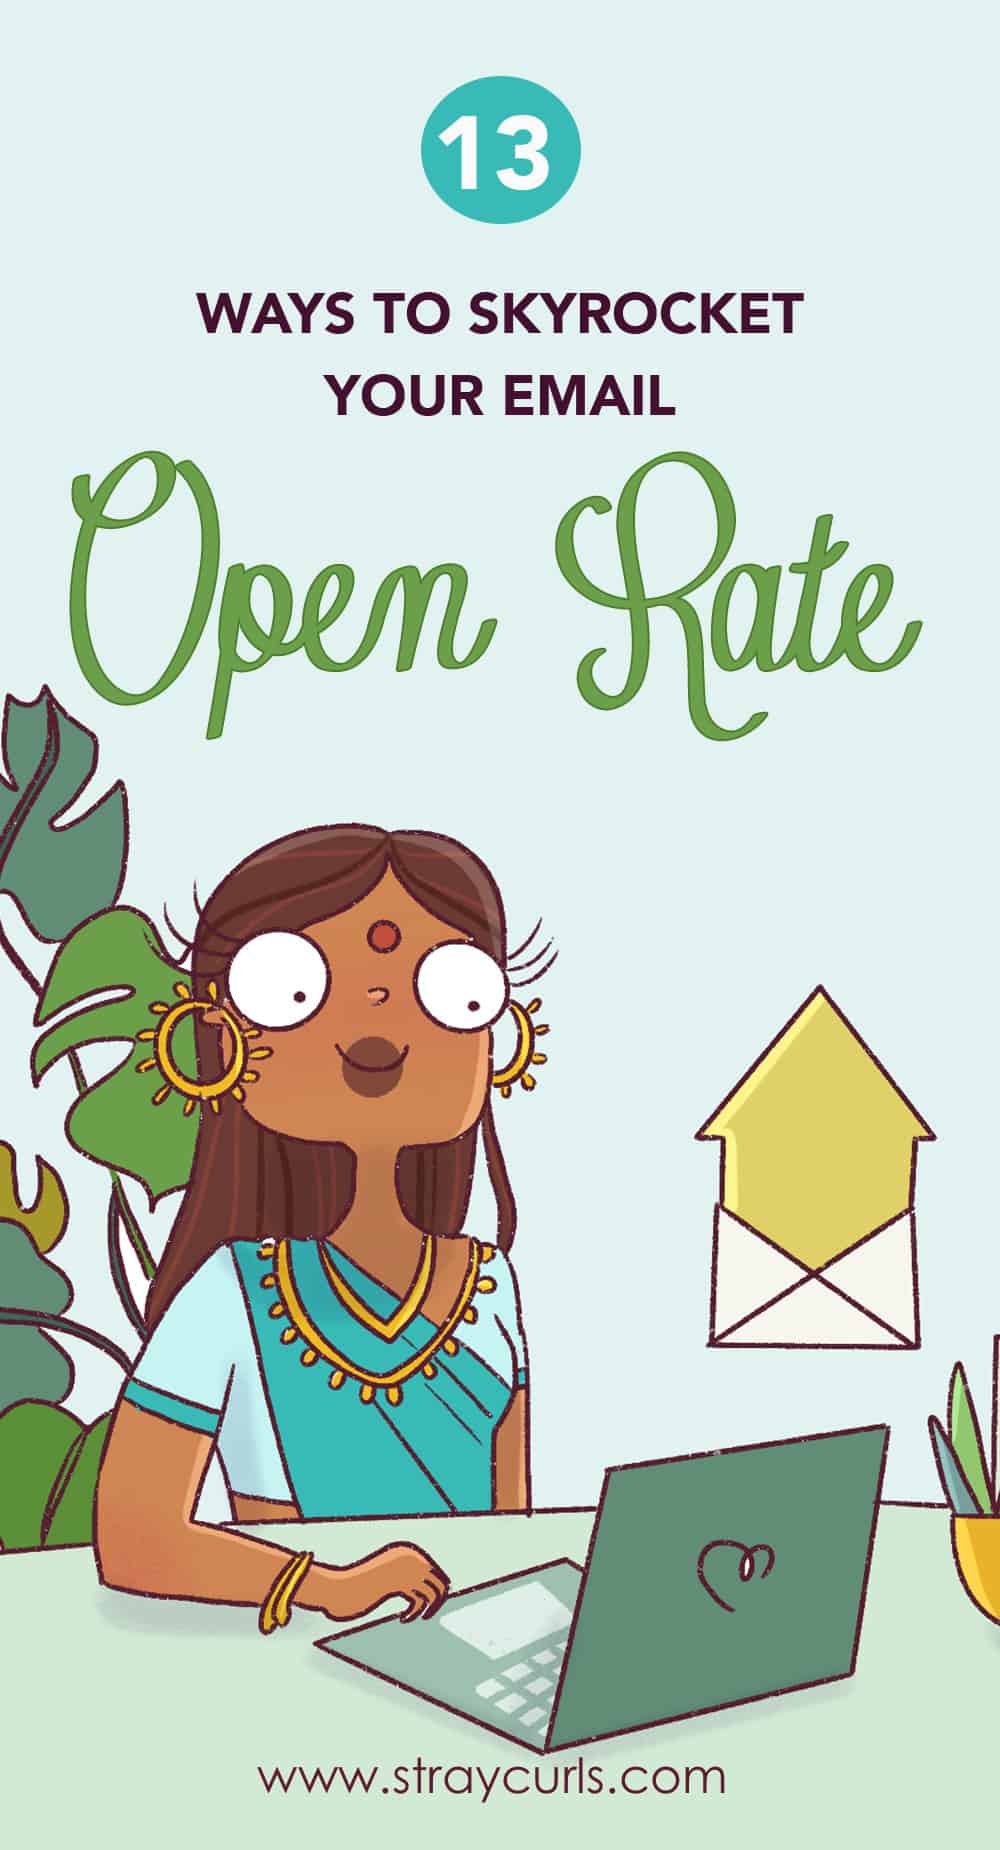 Learn to increase your email open rate so that you can monetize your blog!